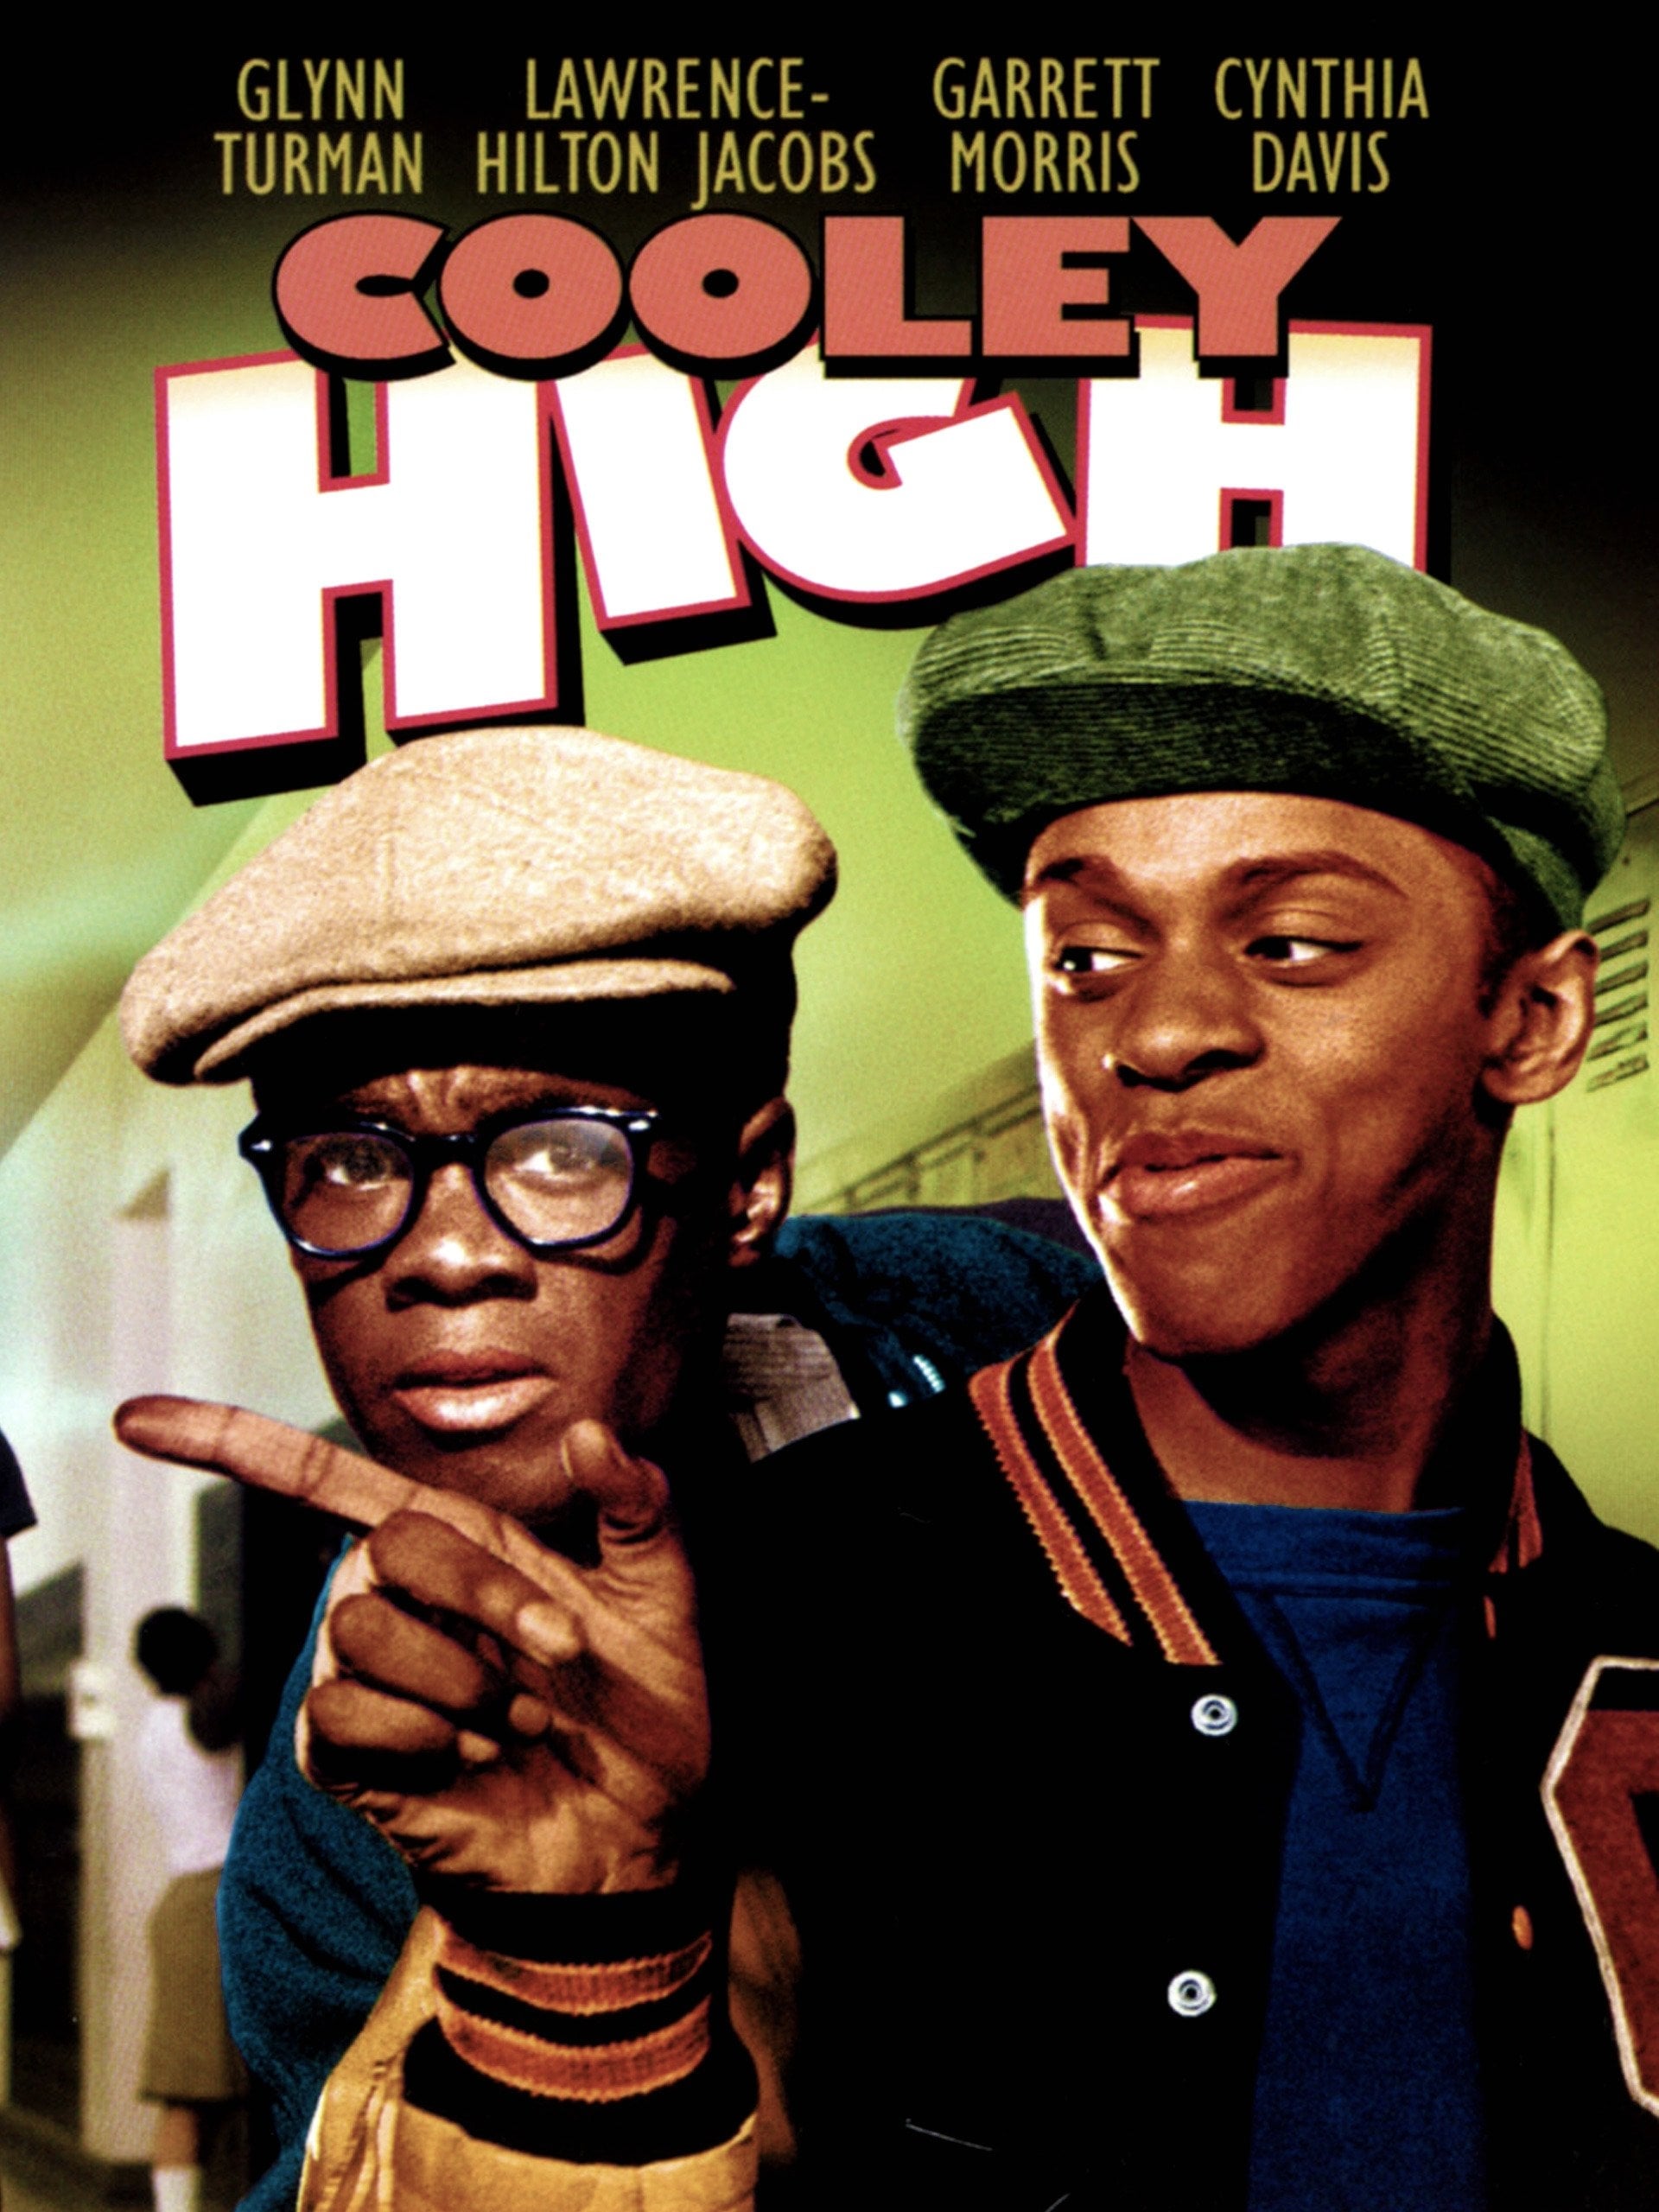 Cooley High streaming